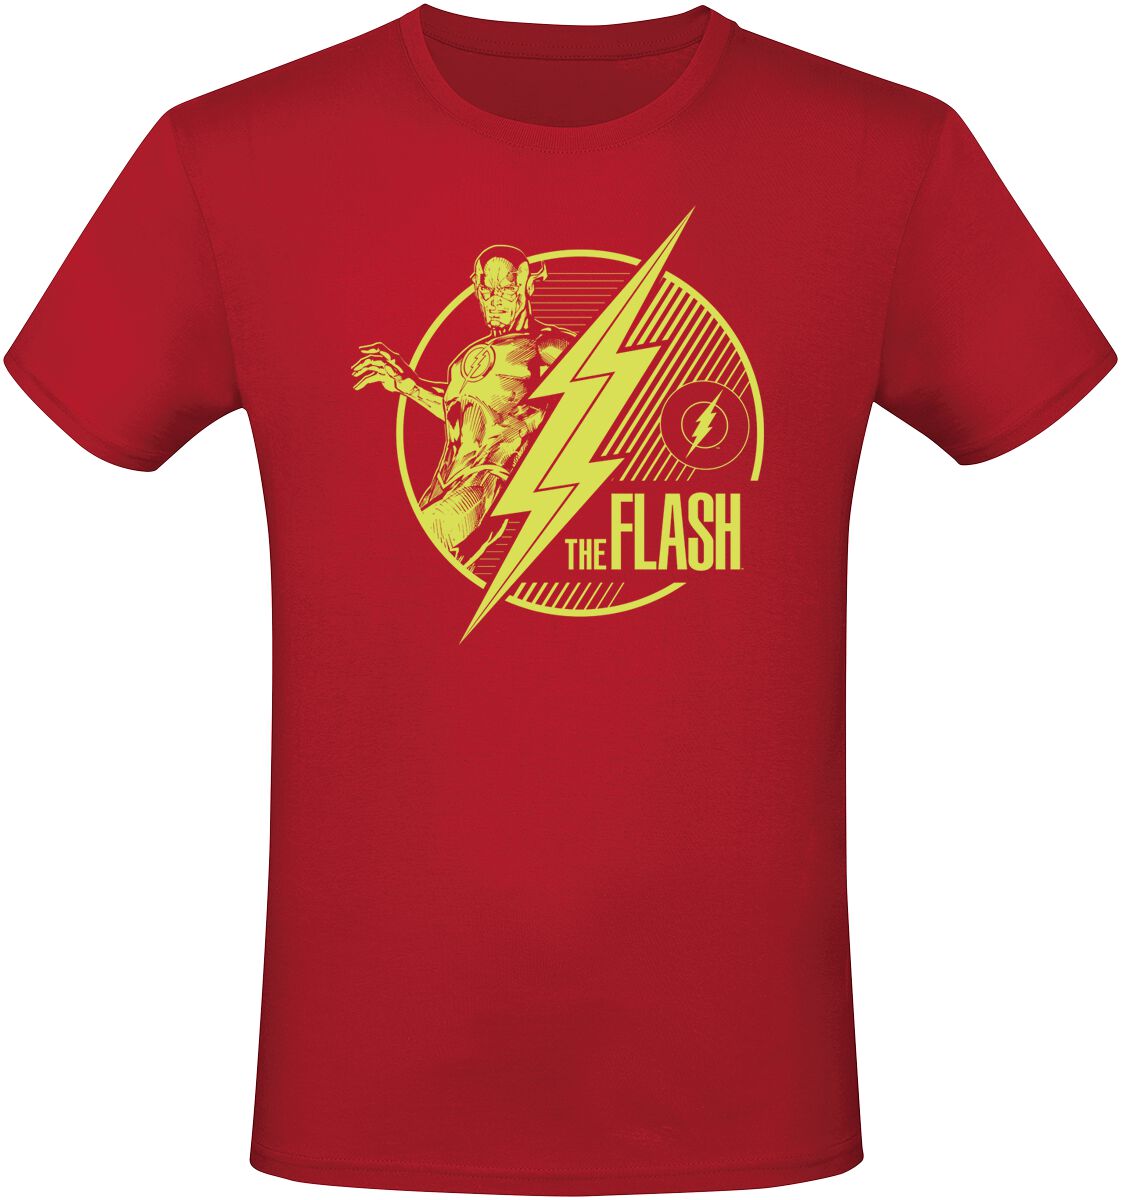 The Flash Flash T-Shirt rot in L